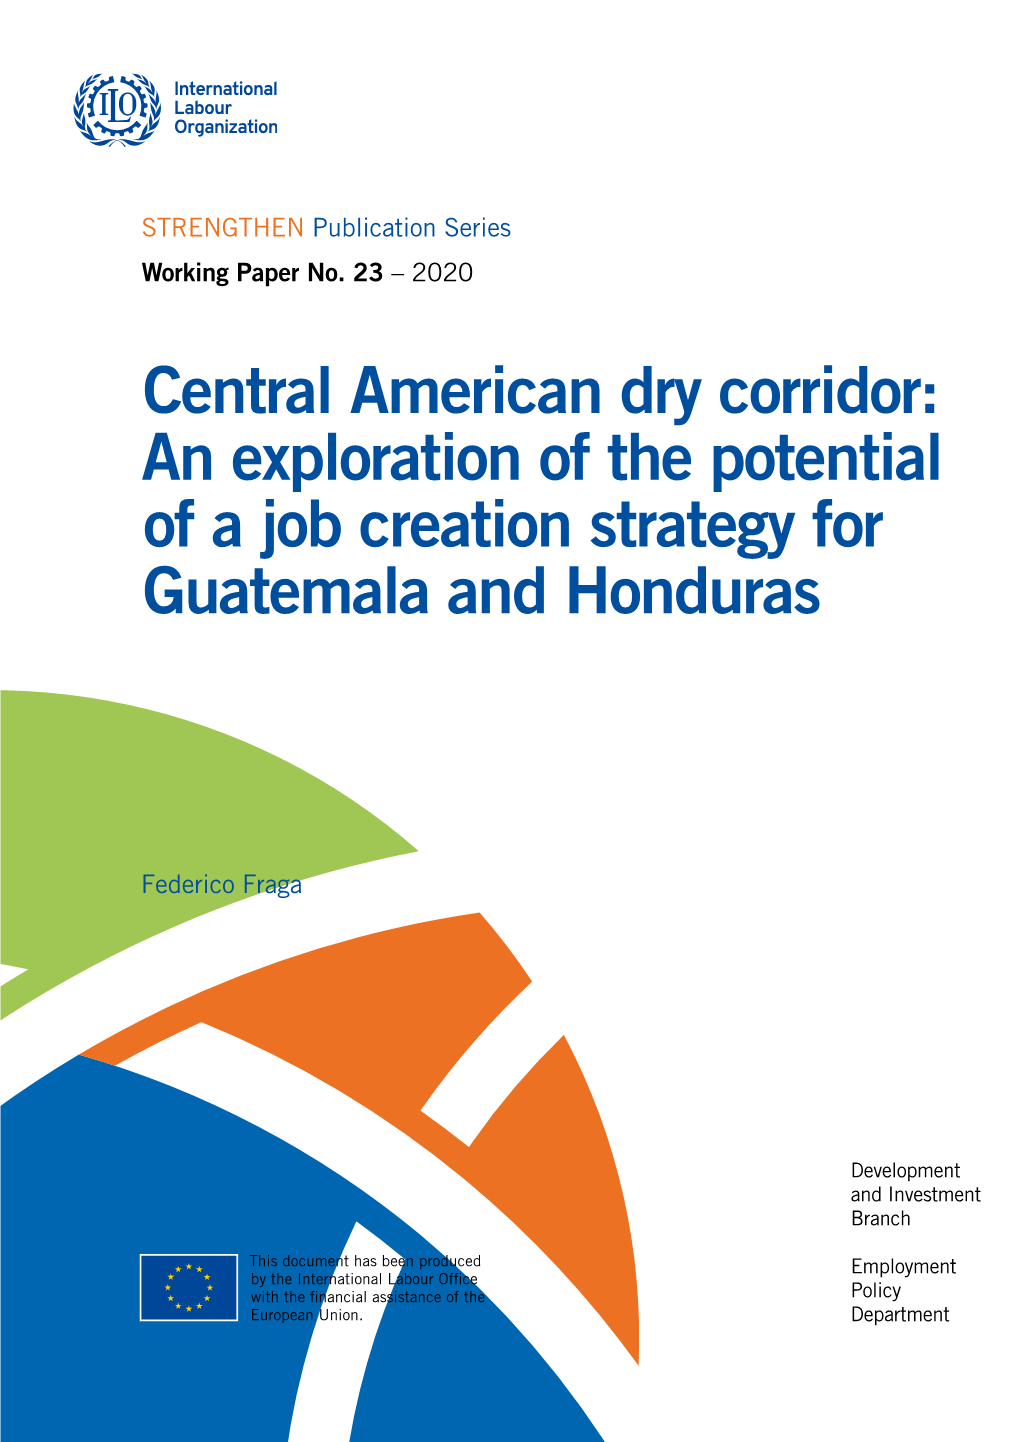 Dry Corridor: an Exploration of the Potential of a Job Creation Strategy for Guatemala and Honduras